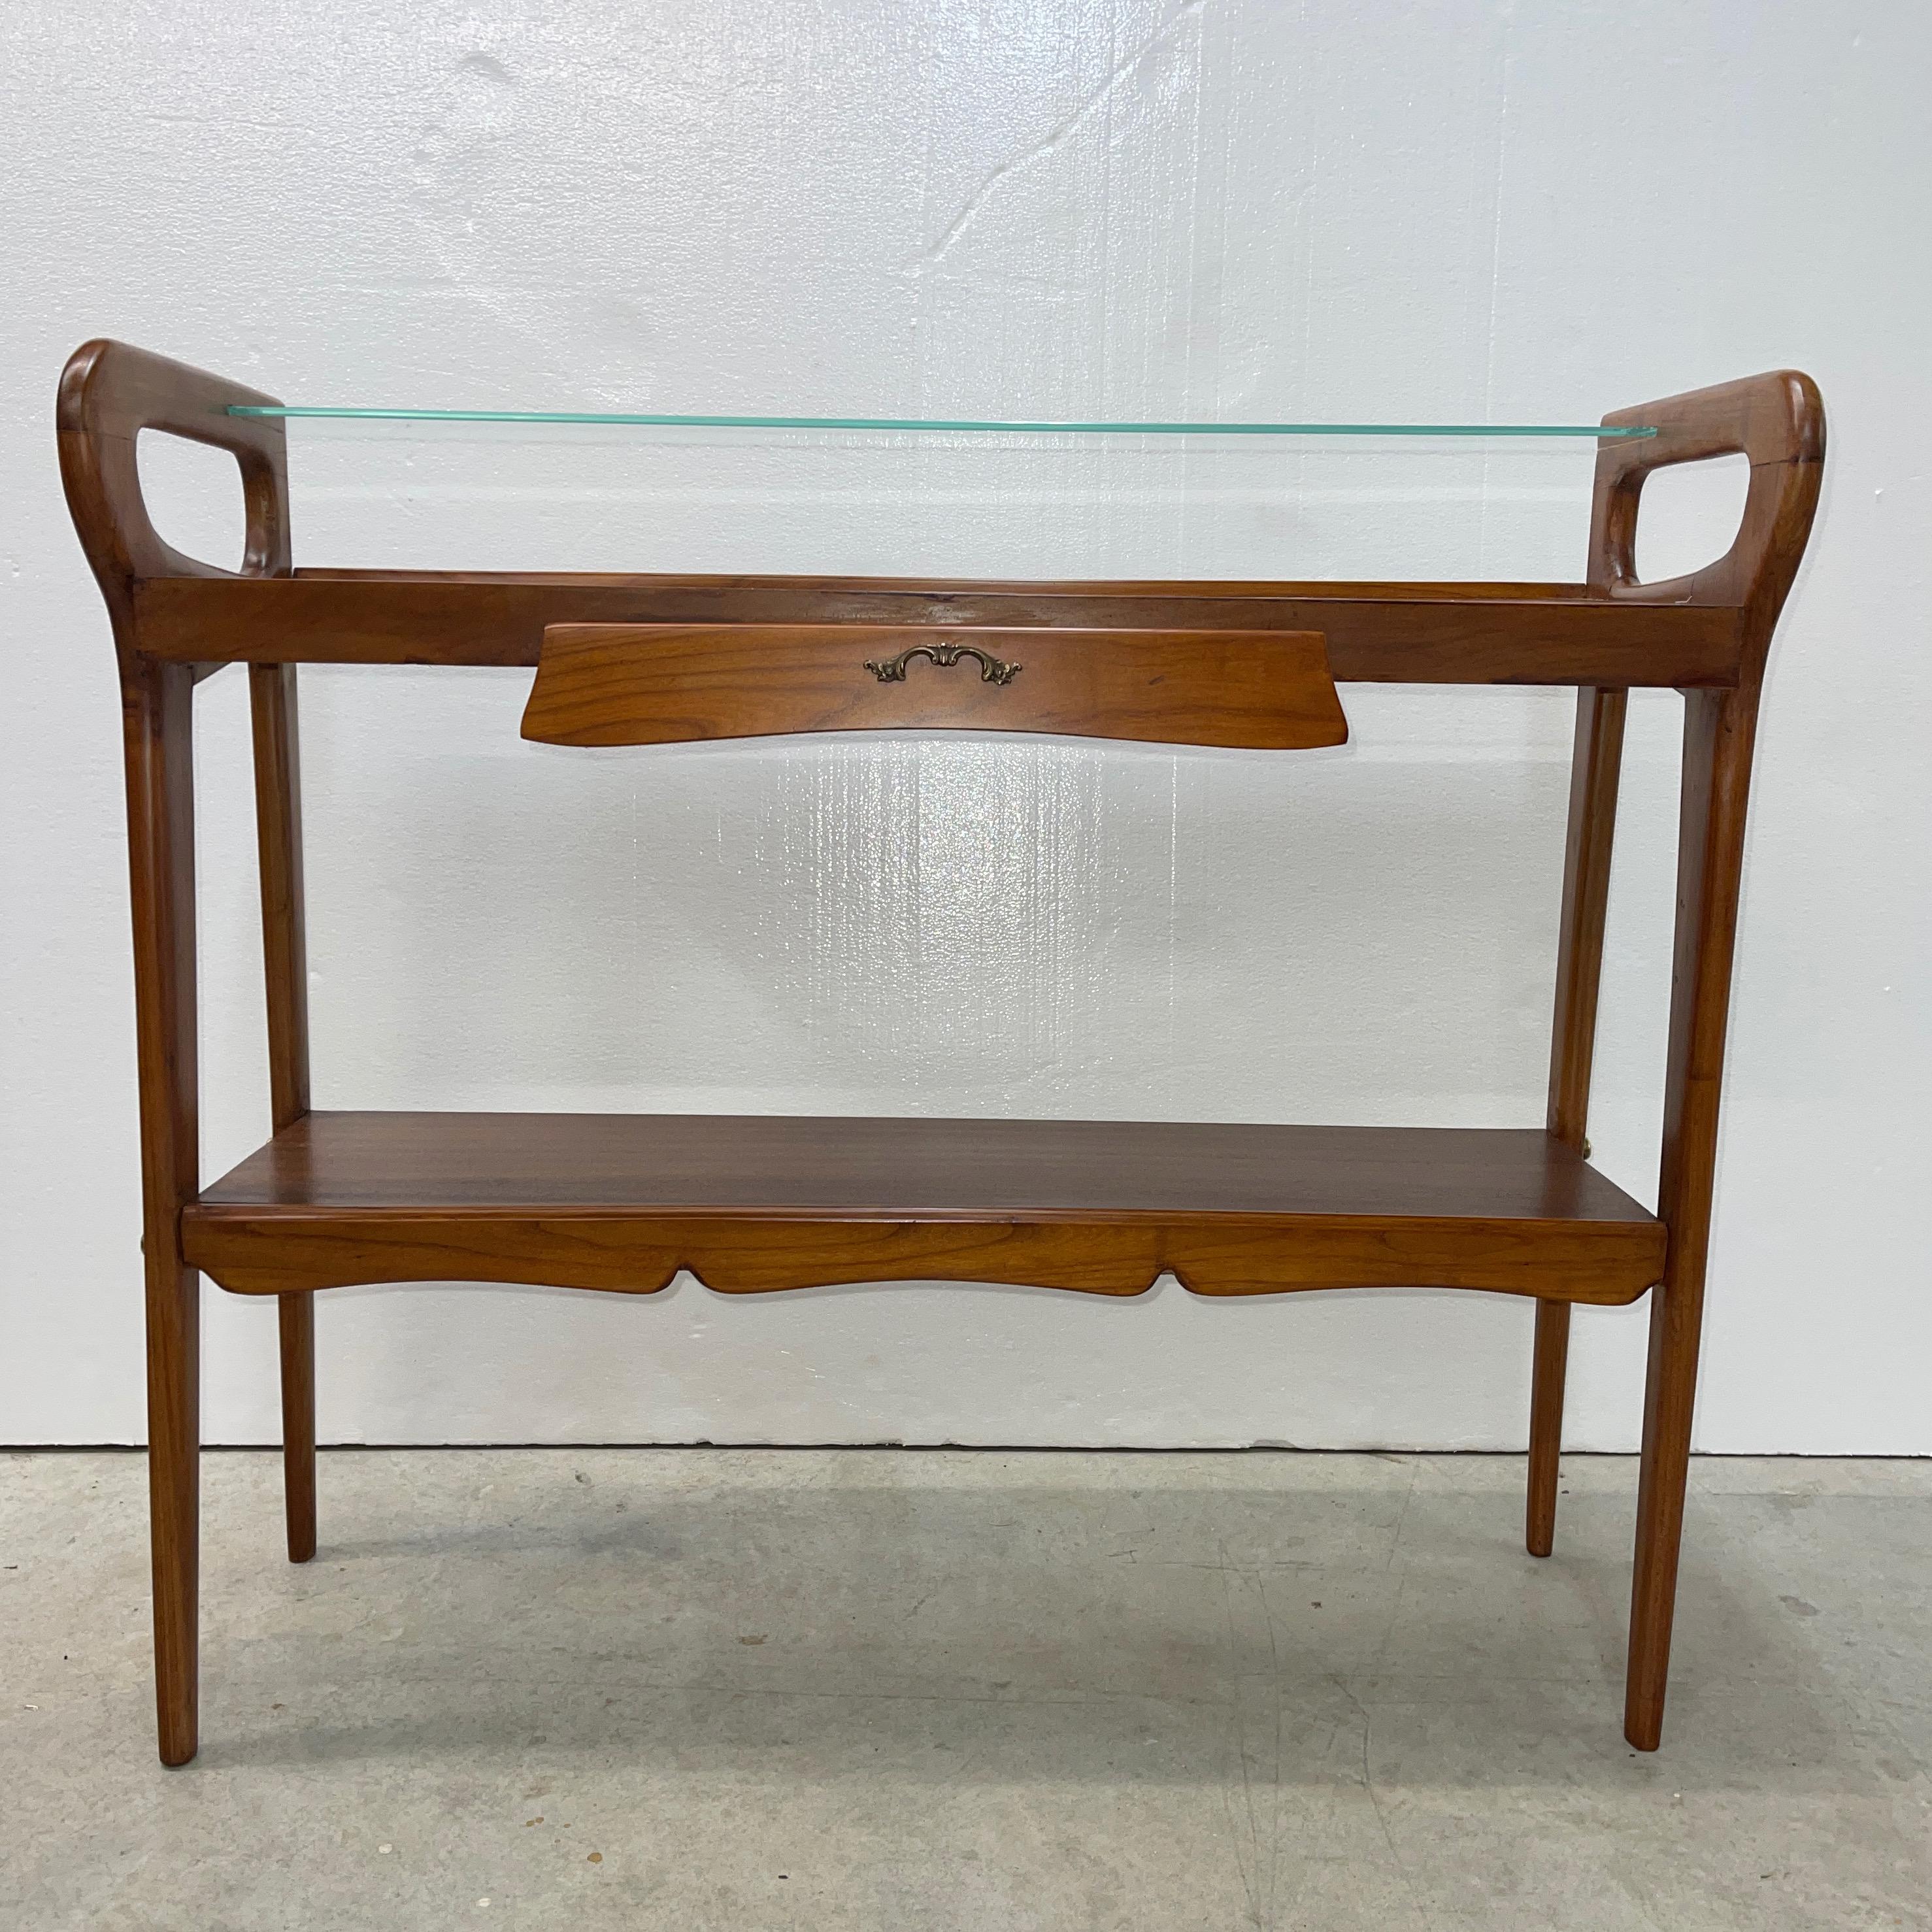 1950's Italian console table in the manner of Ico & Luisa Parisi for Angelo De Baggis, Cantu. A glass insert shelf over two fruitwood shelves with a single drawer, all joined by the shaped open sides, characteristic of the period. 